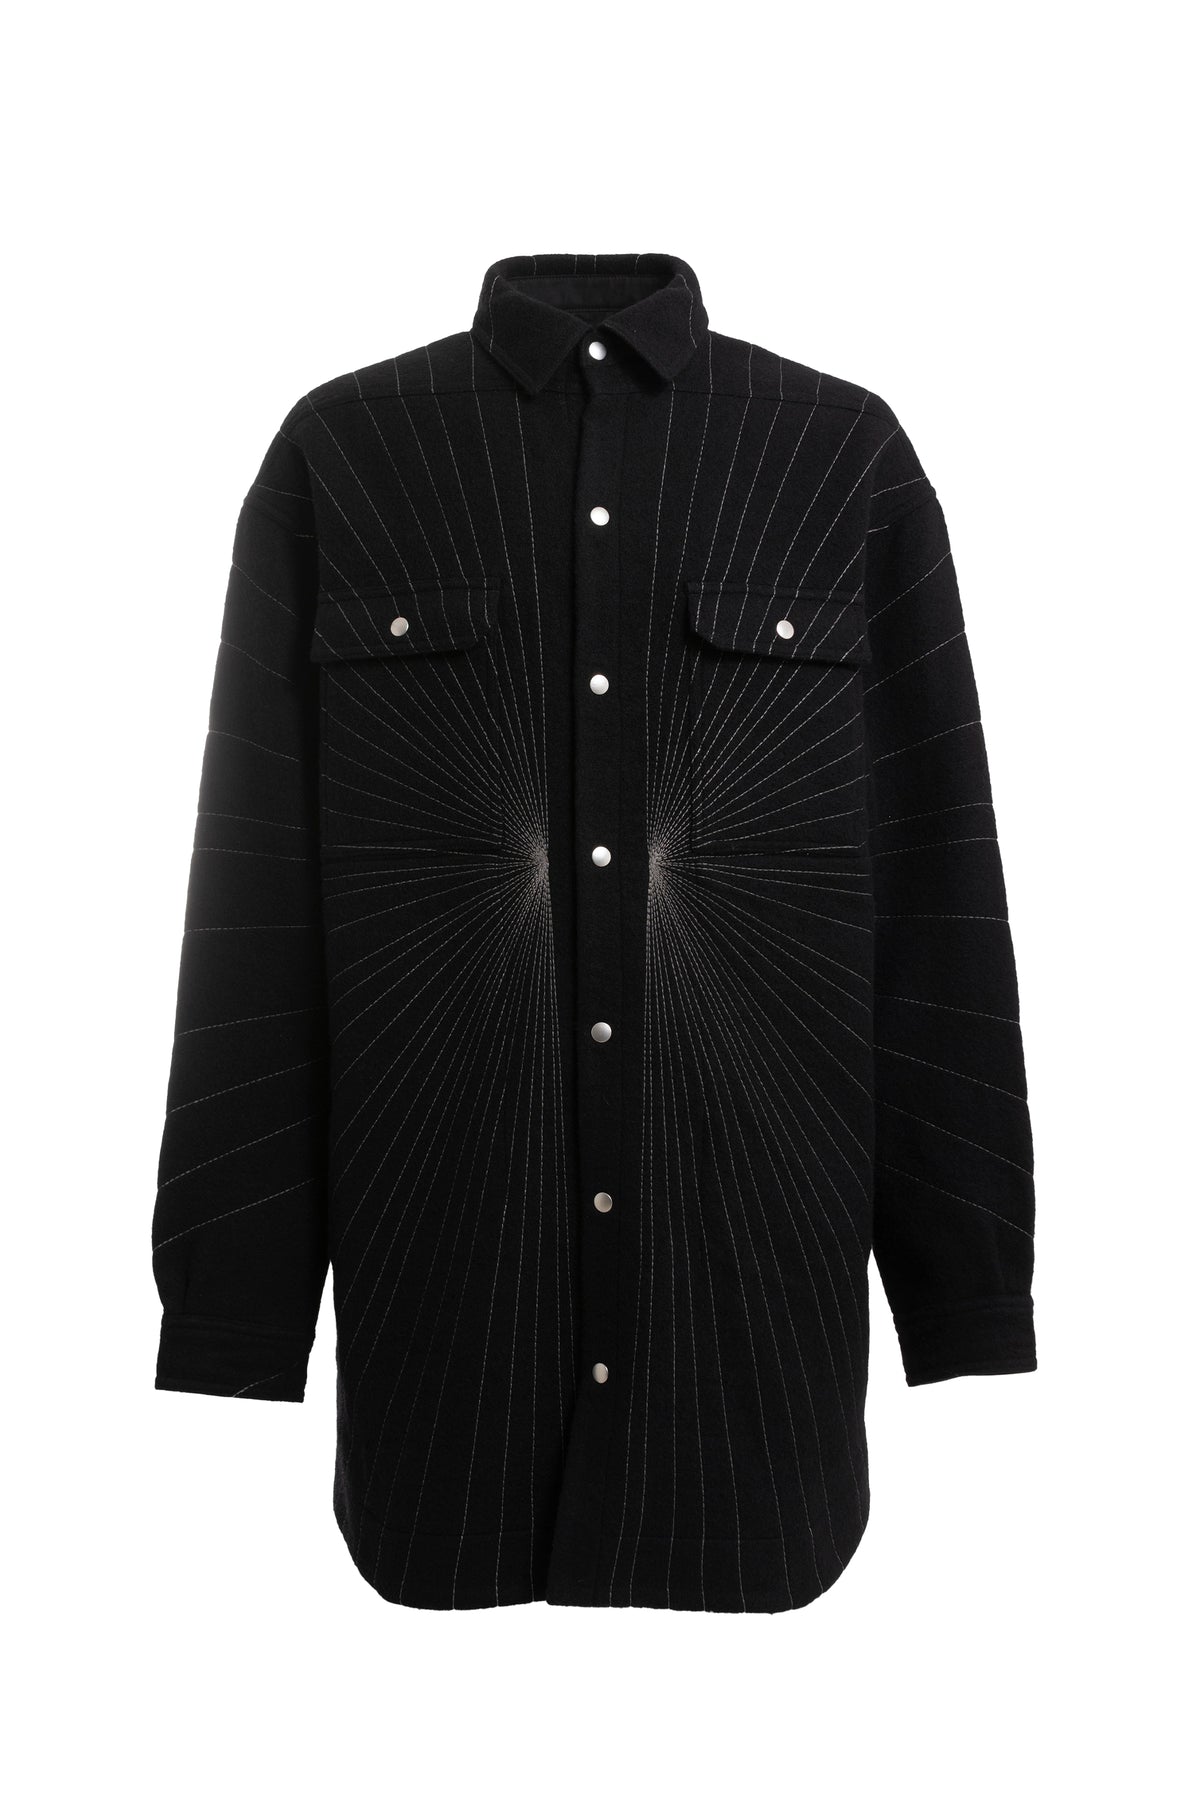 OVERSIZED OUTERSHIRT / BLK